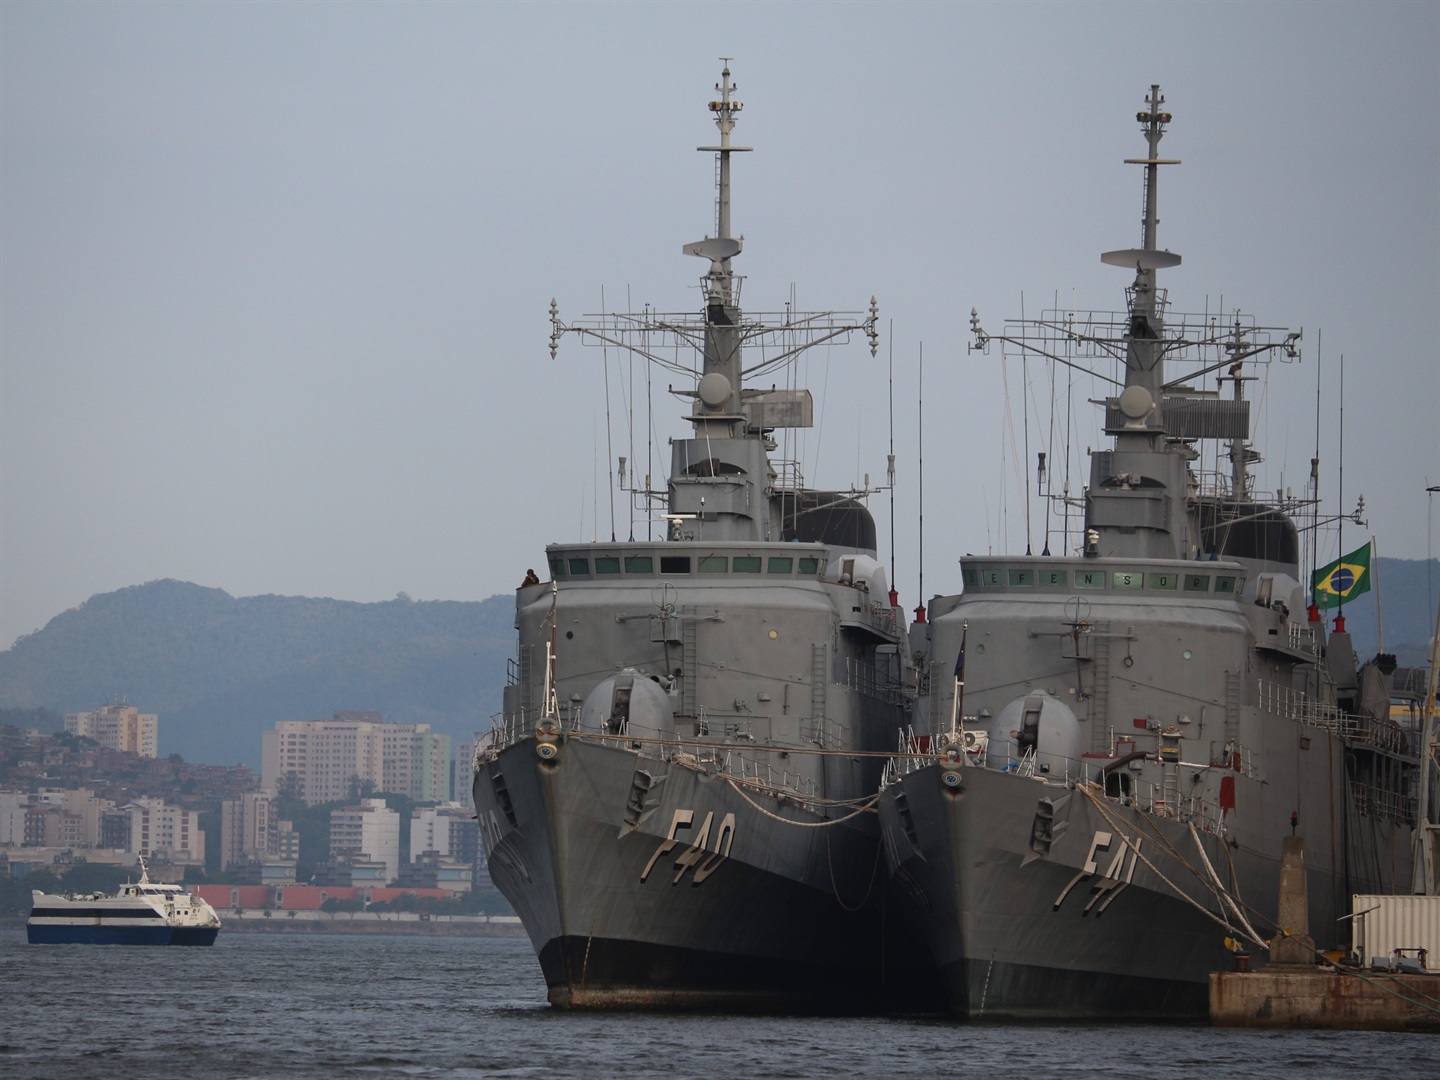 Businessinsider.co.za | Brazil wants to abandon a warship and it could become one of the biggest pieces of ocean garbage